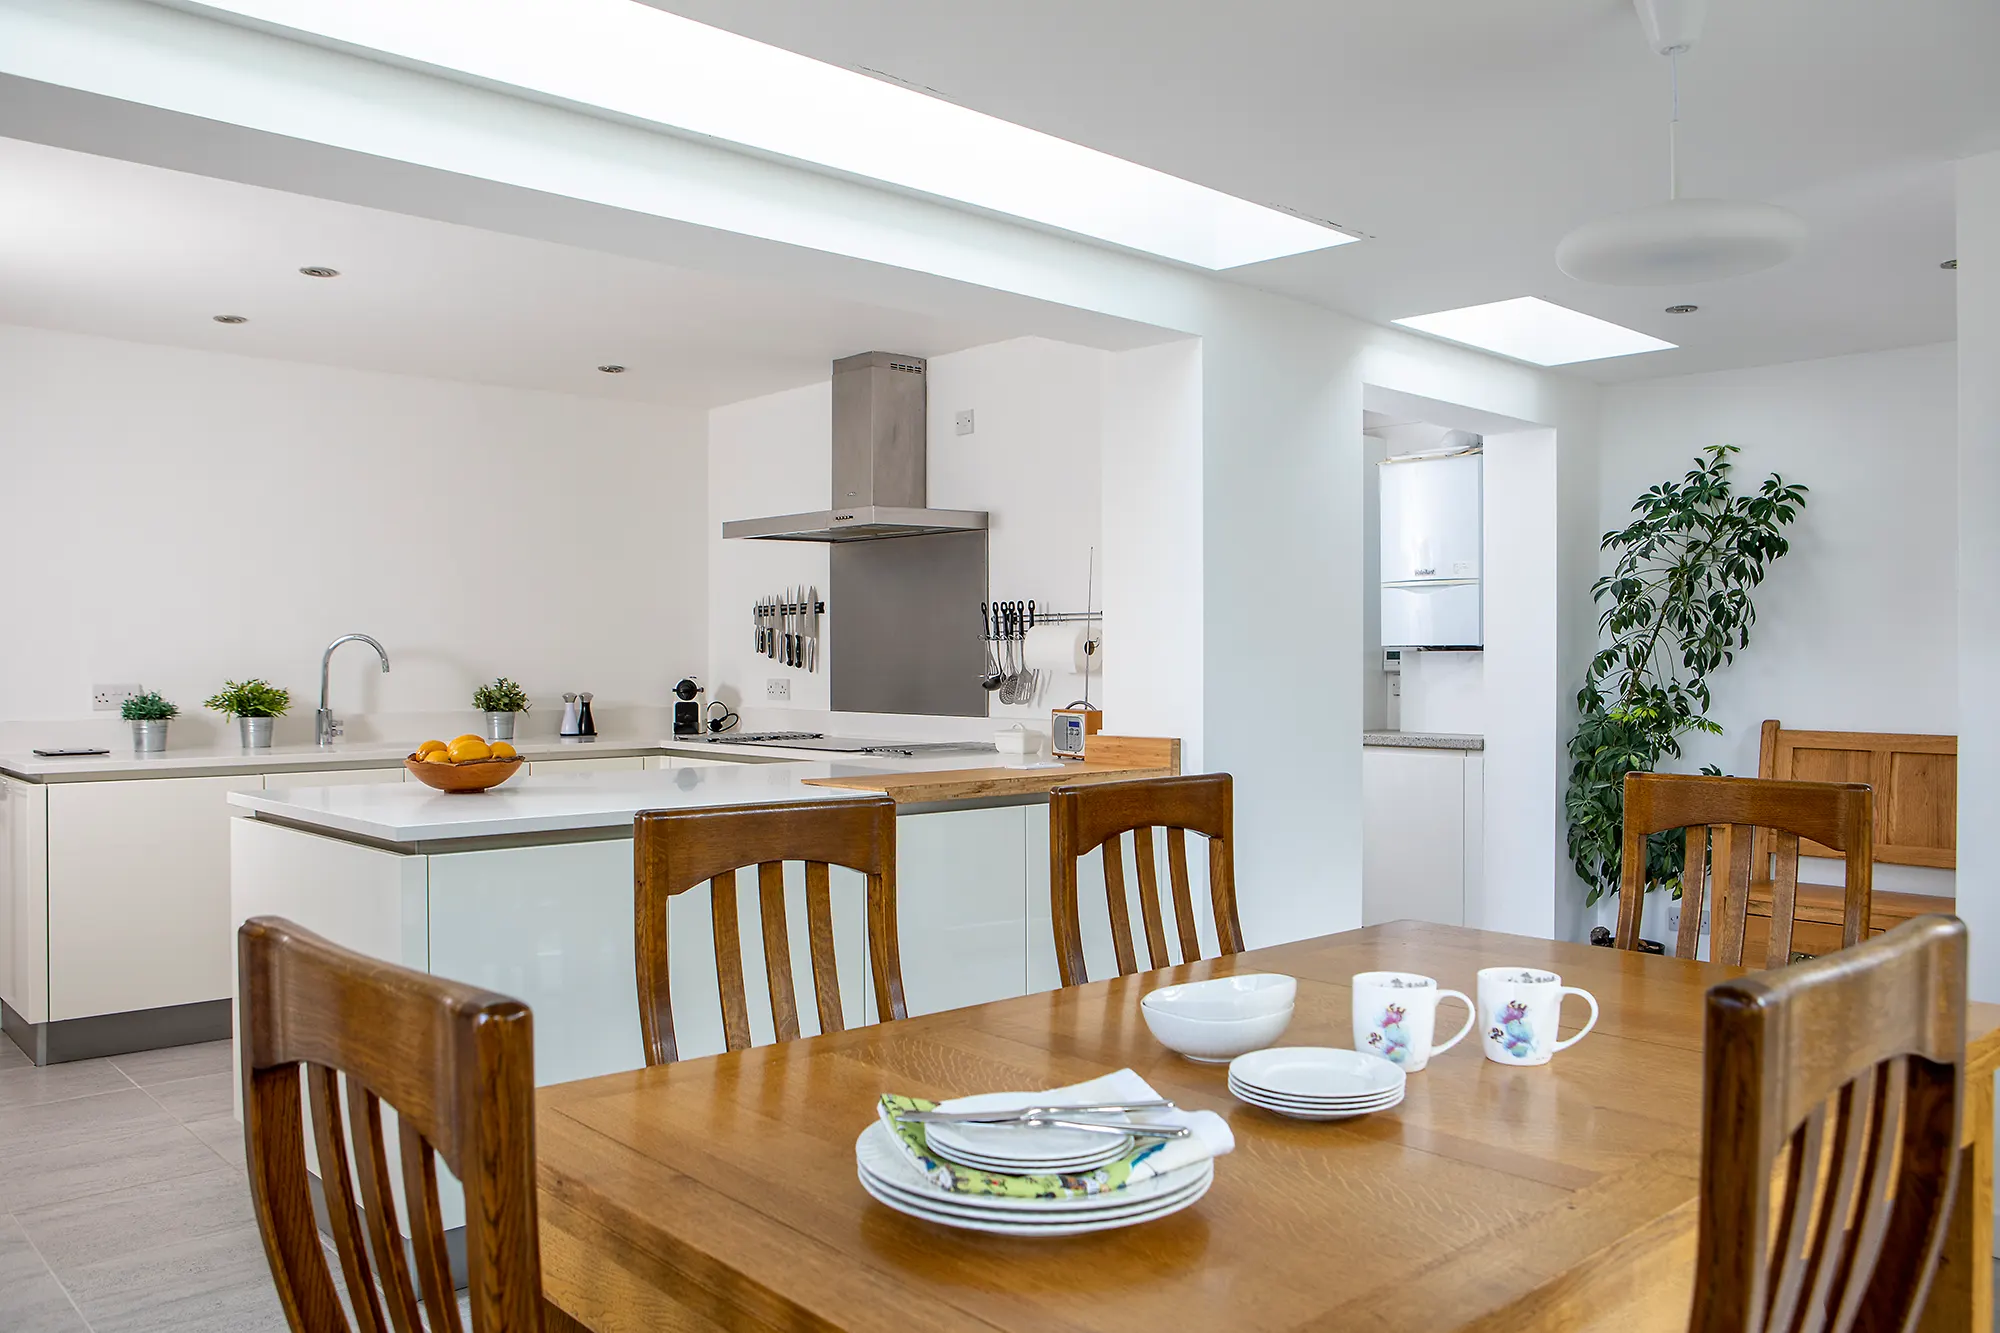 Kitchen extension with roof lanterns